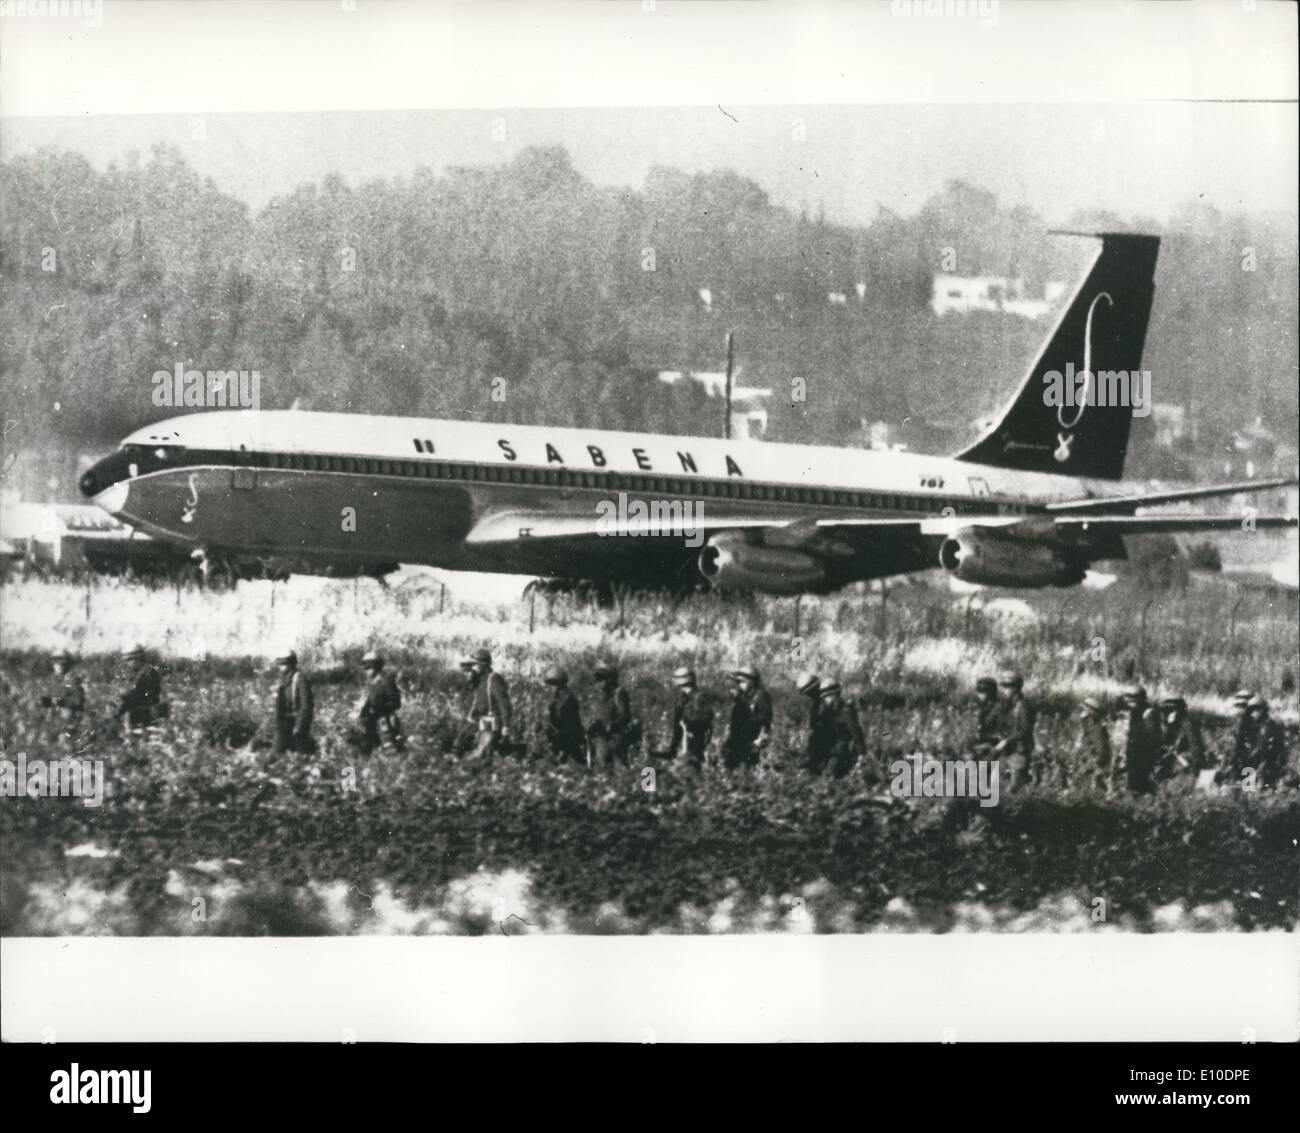 May 05, 1972 - Two Boeing hijacked shot dead: All the 100 passengers on the hi jacked Boeing 707 of Sabena Airliner are safe after two of the hijackers had been shot dead today - and two others wounded. The jet was seized last night by four Arabs, armed with pistols and grenades, after leaving Vienna, a stopping point on a flight from Brussels to Tel Aviv. Photo Shows This picture just received by radio, shows soldiers surrounding the hijacked aircraft at Lod Airport, Tel Aviv. Stock Photo